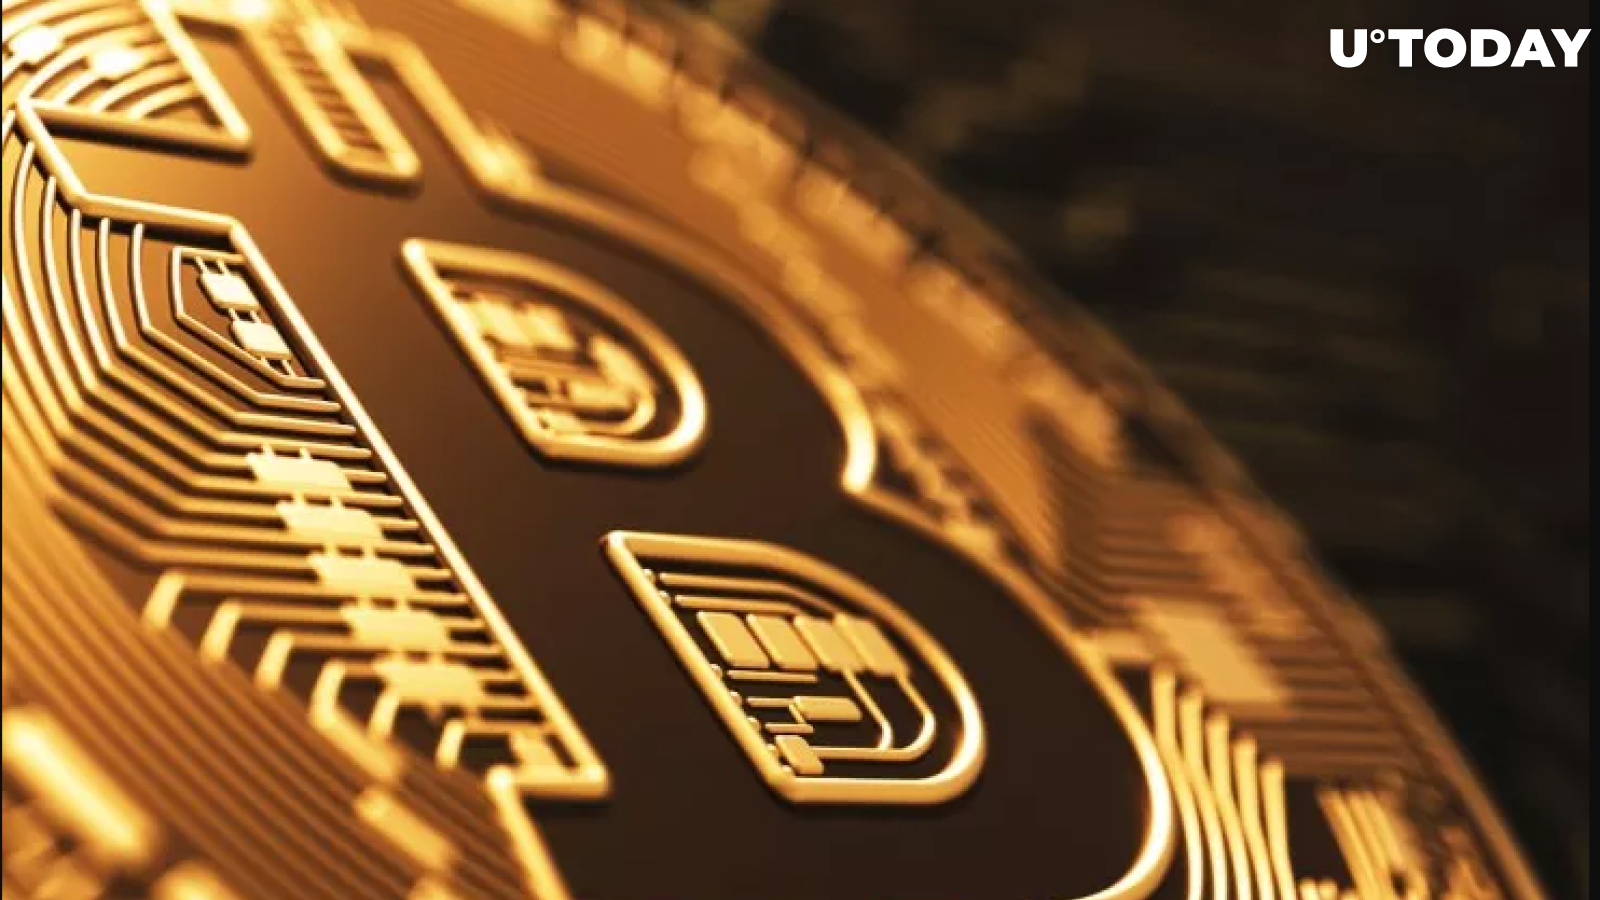 These Are Main Reasons Why Bitcoin Just Hit $11,000